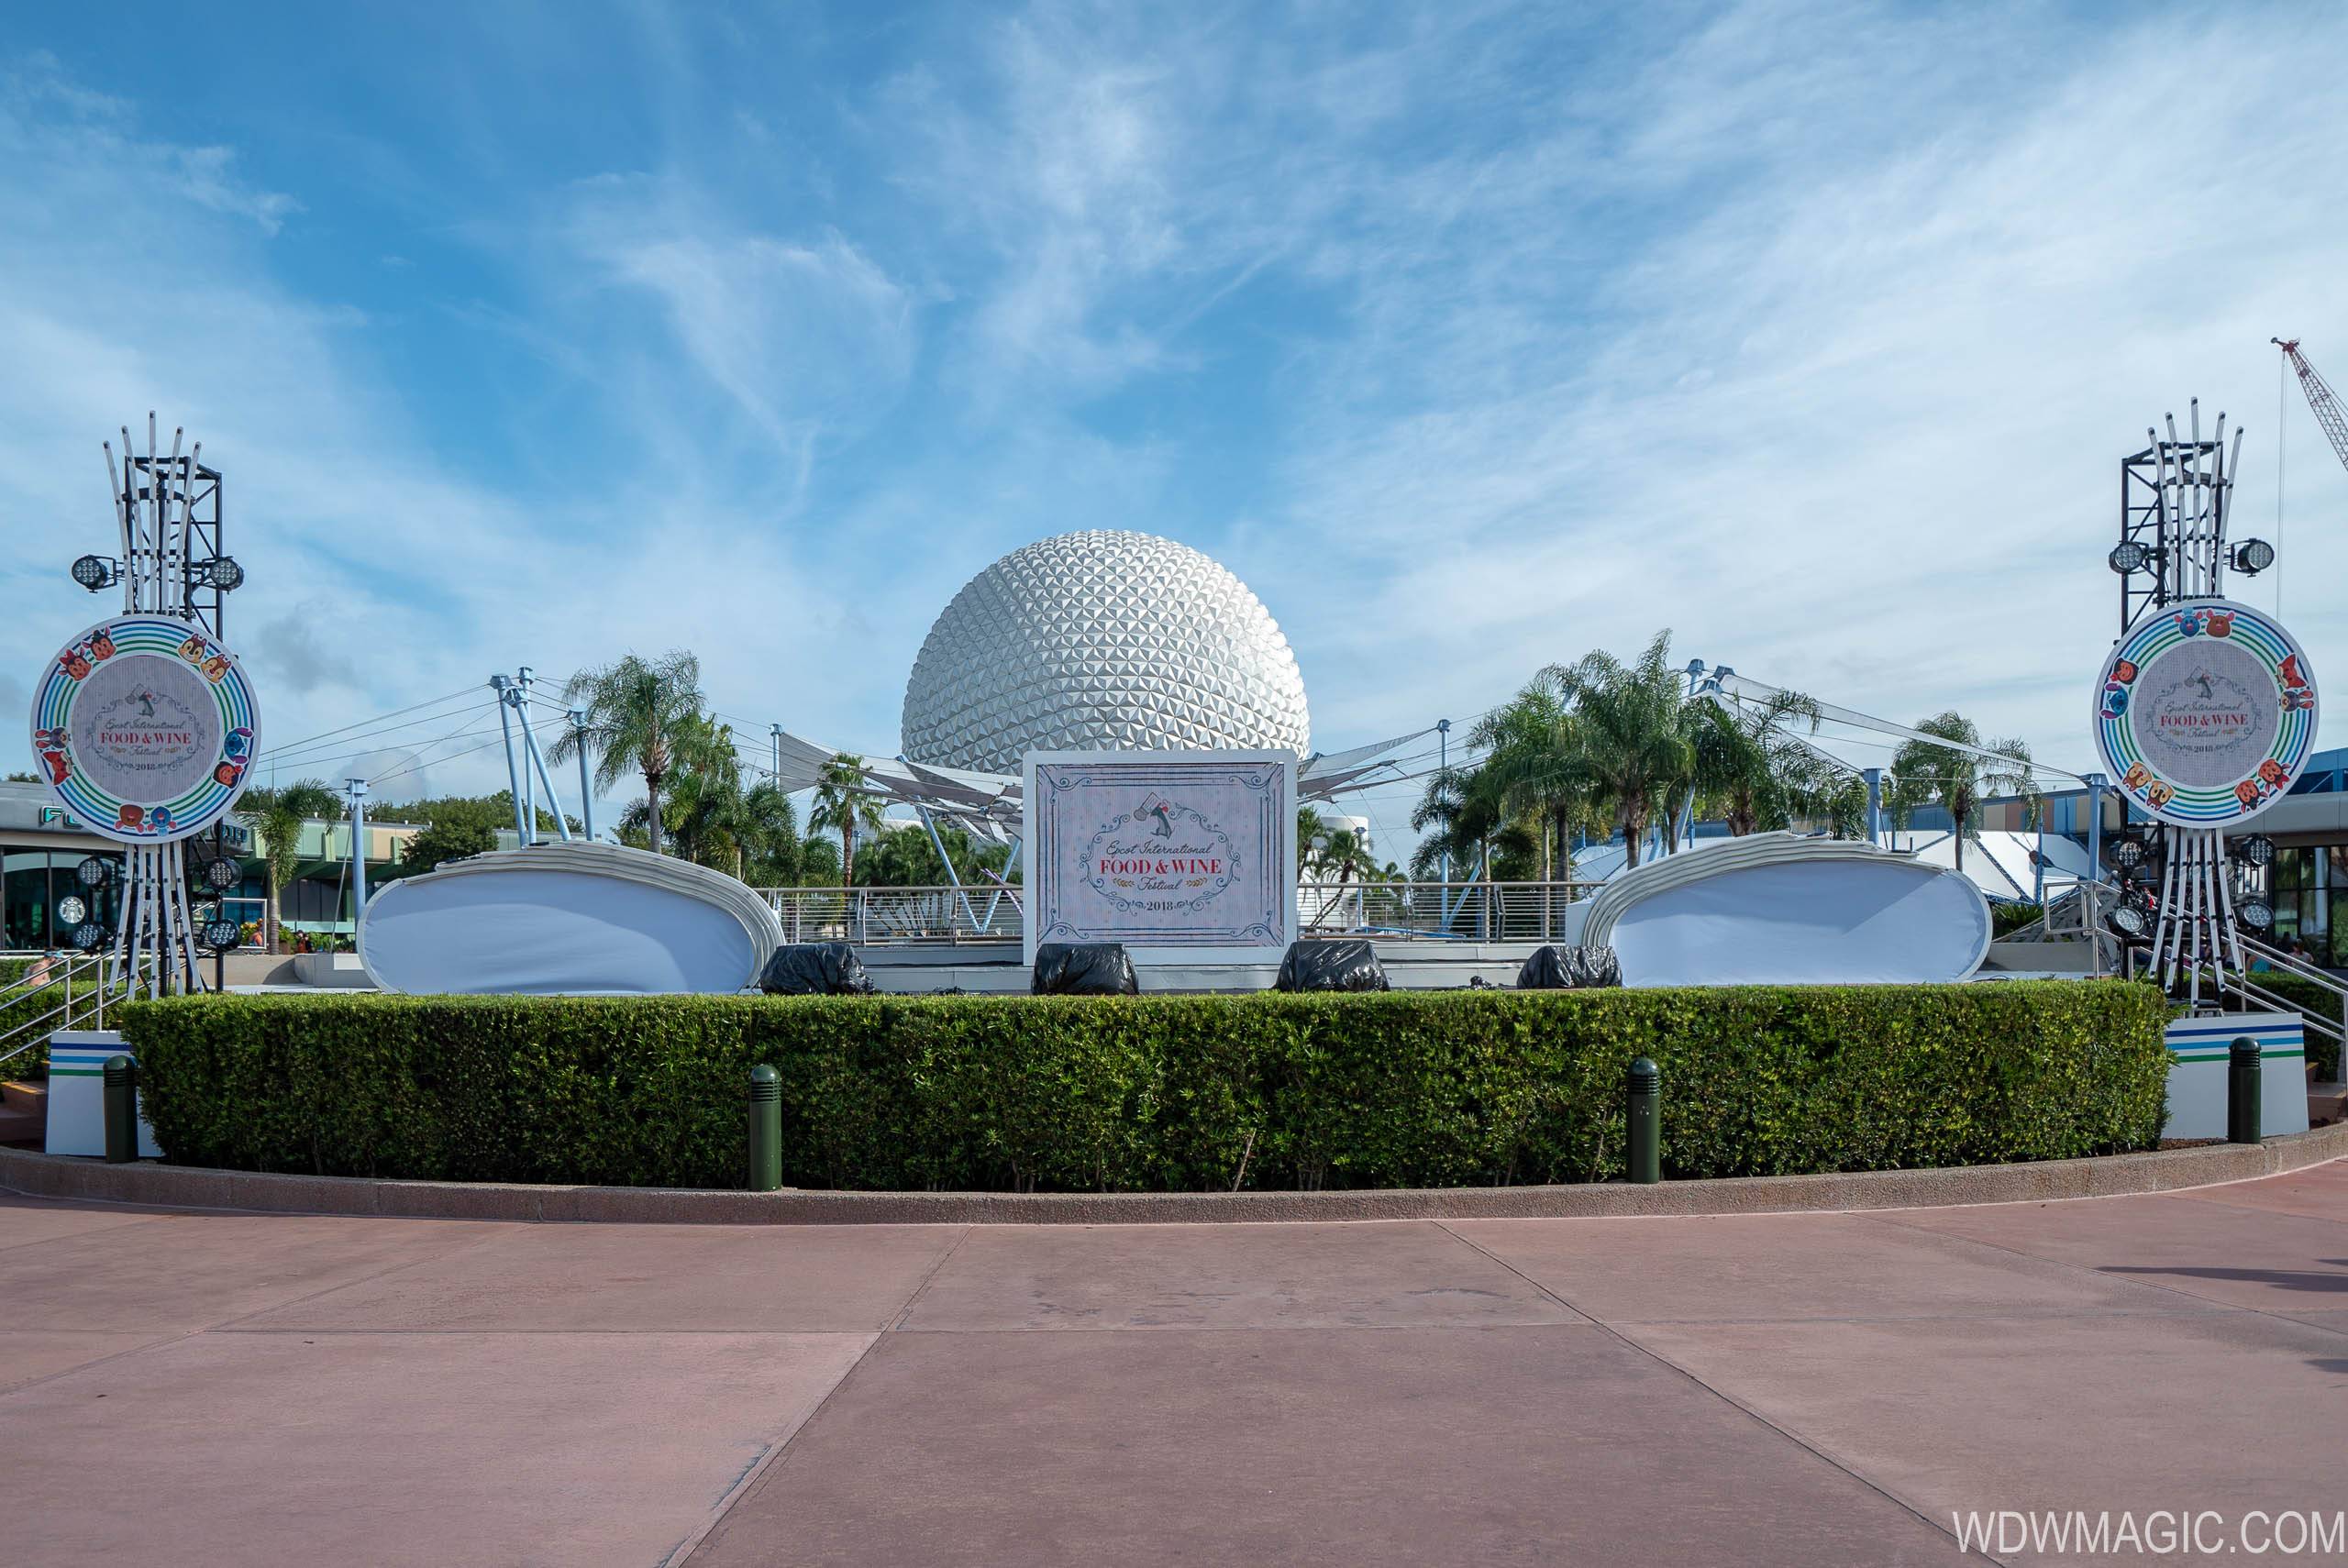 2018 Epcot International Food and Wine Festival opening day